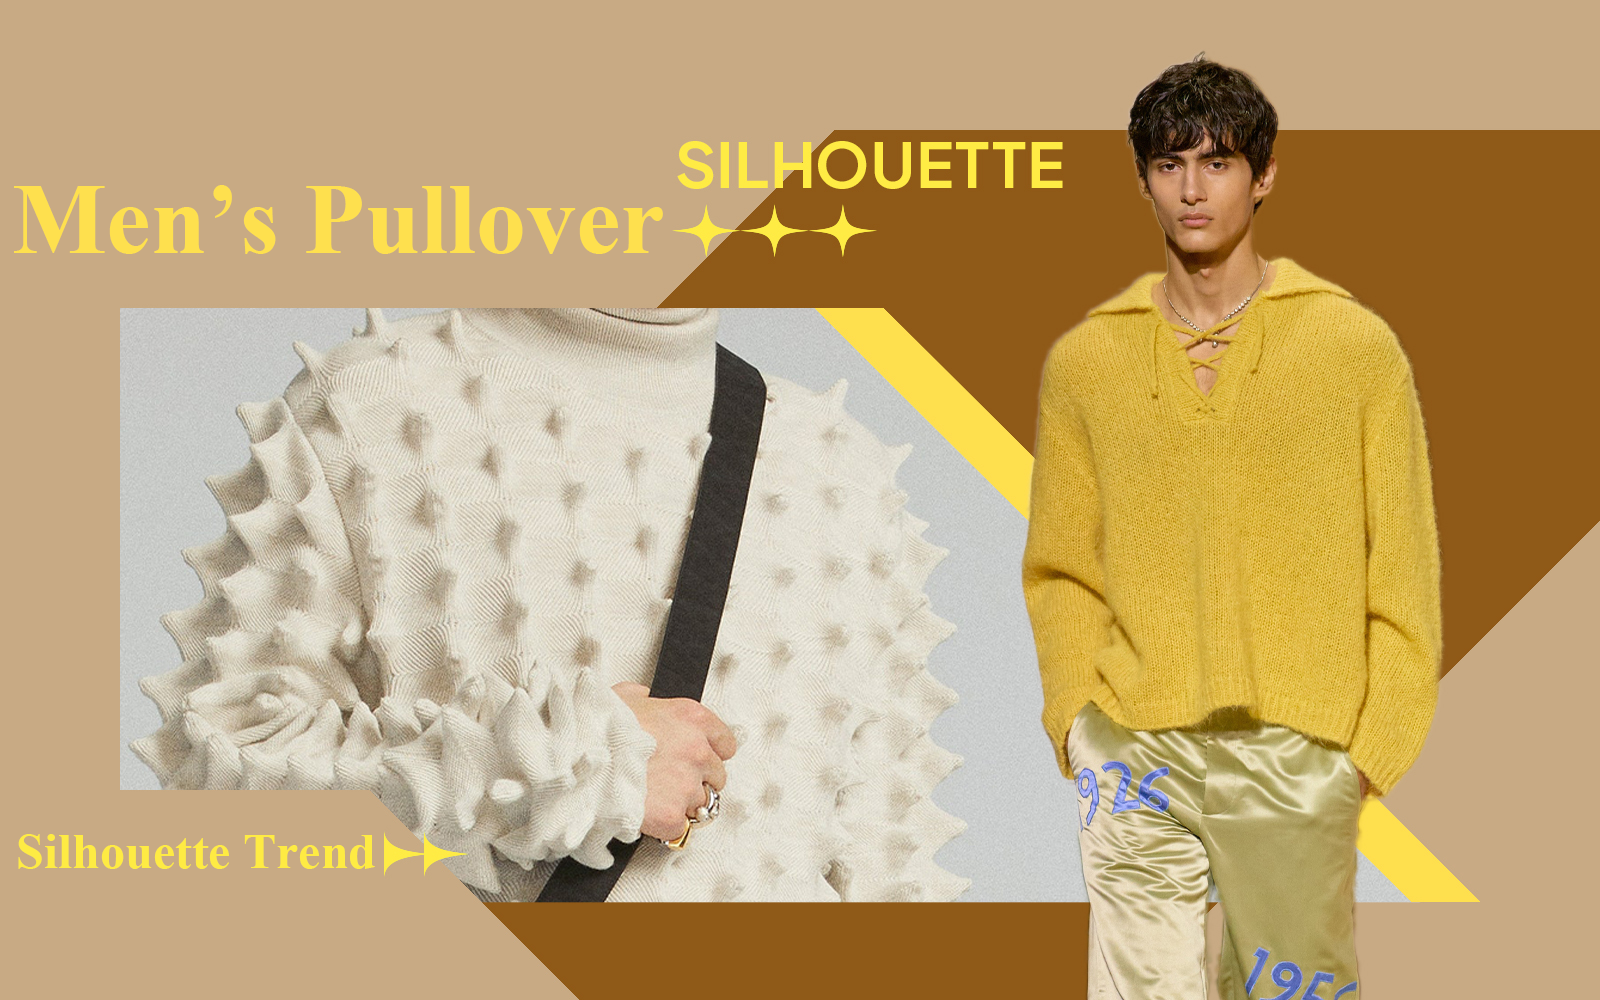 A/W 24/25 Silhouette Trend for Men's Knitted Pullover